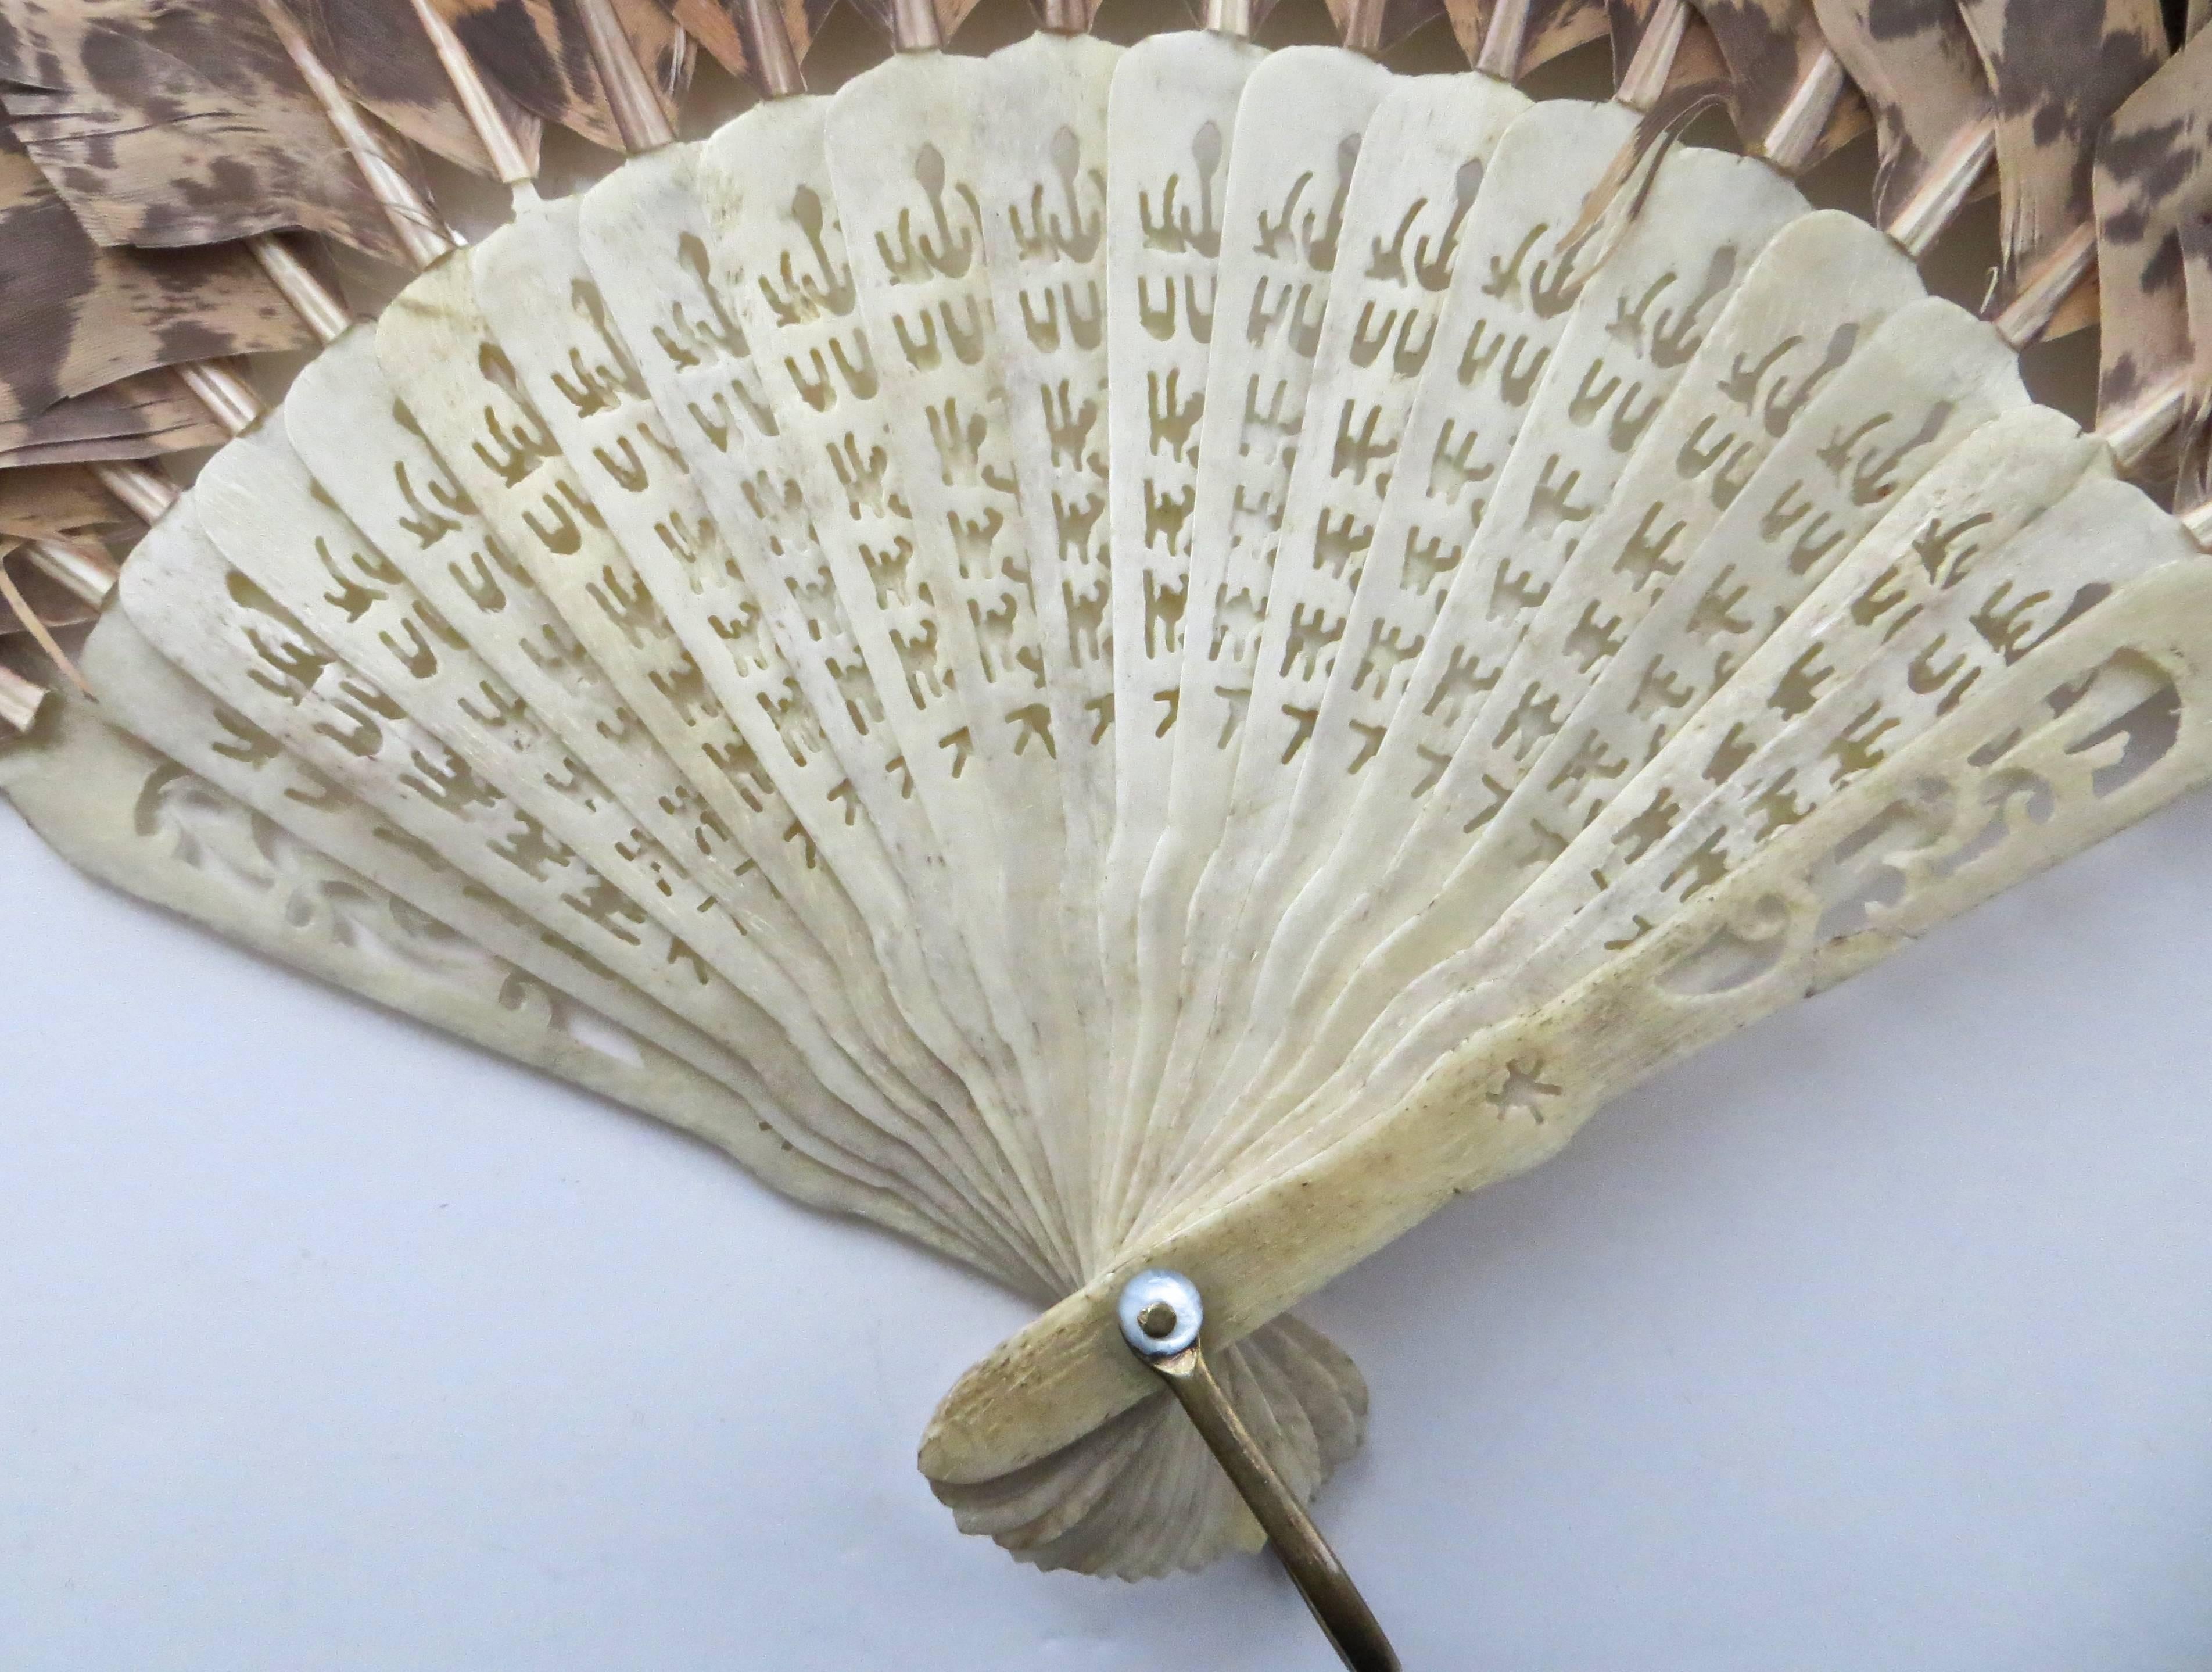 Victorian Hand Held Fan of Peacock Feathers, Japan, circa 1880s